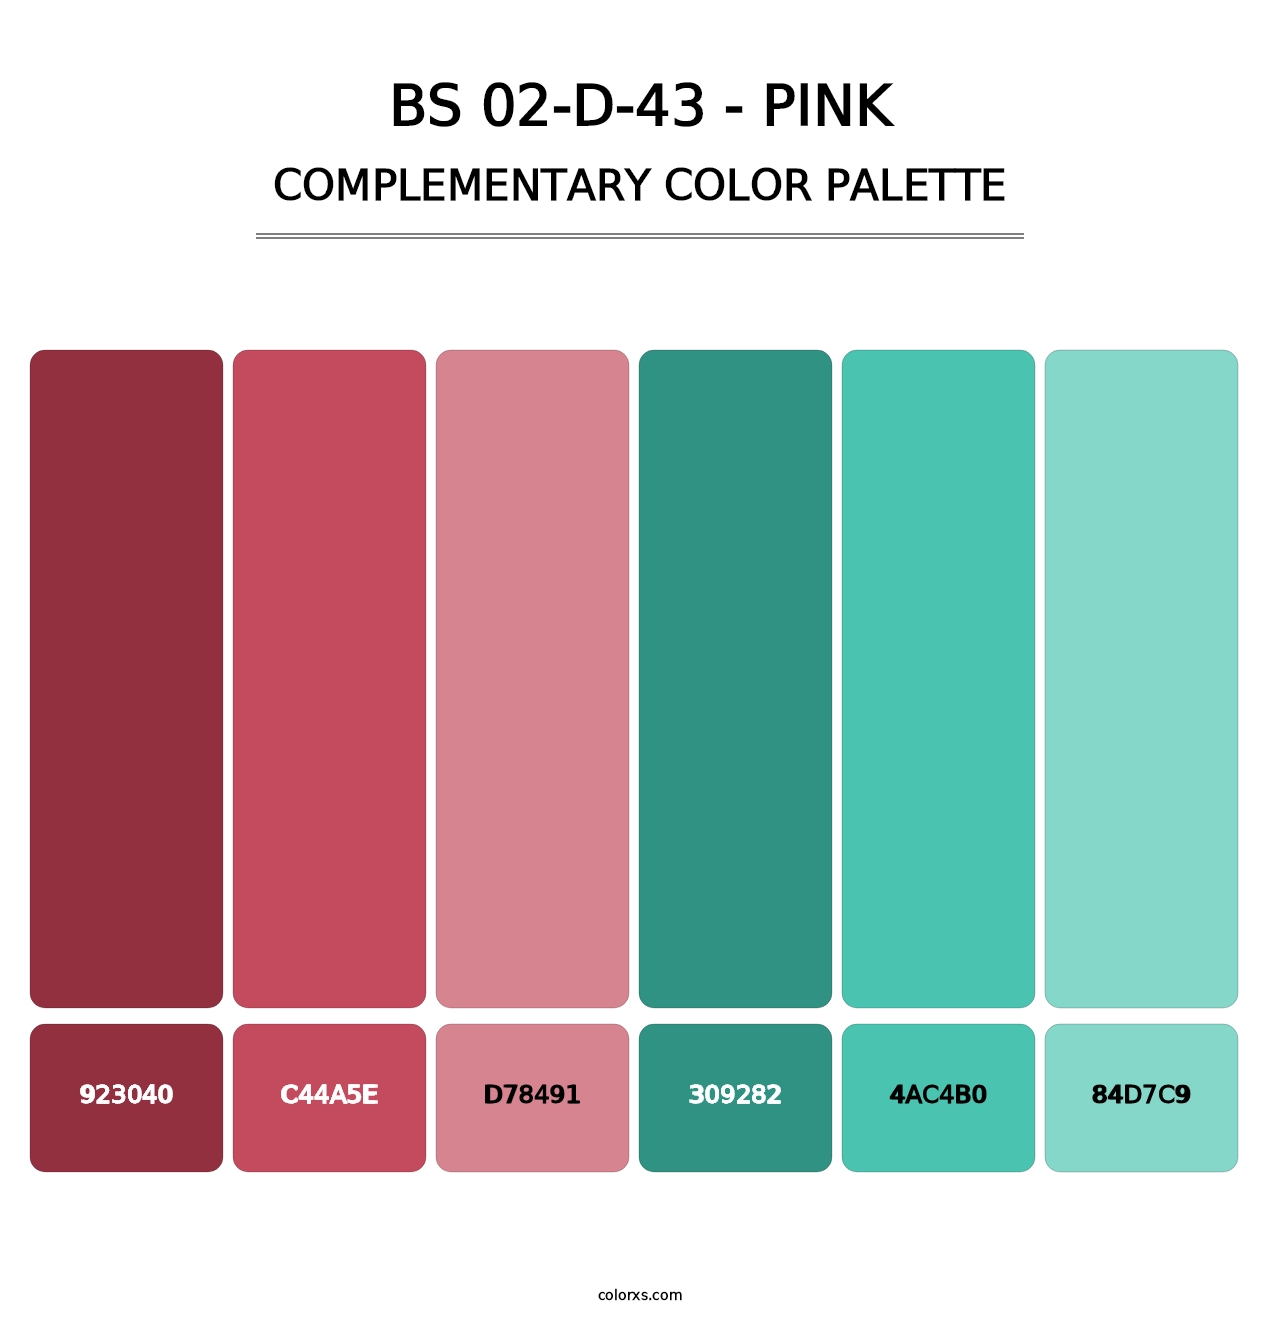 BS 02-D-43 - Pink - Complementary Color Palette